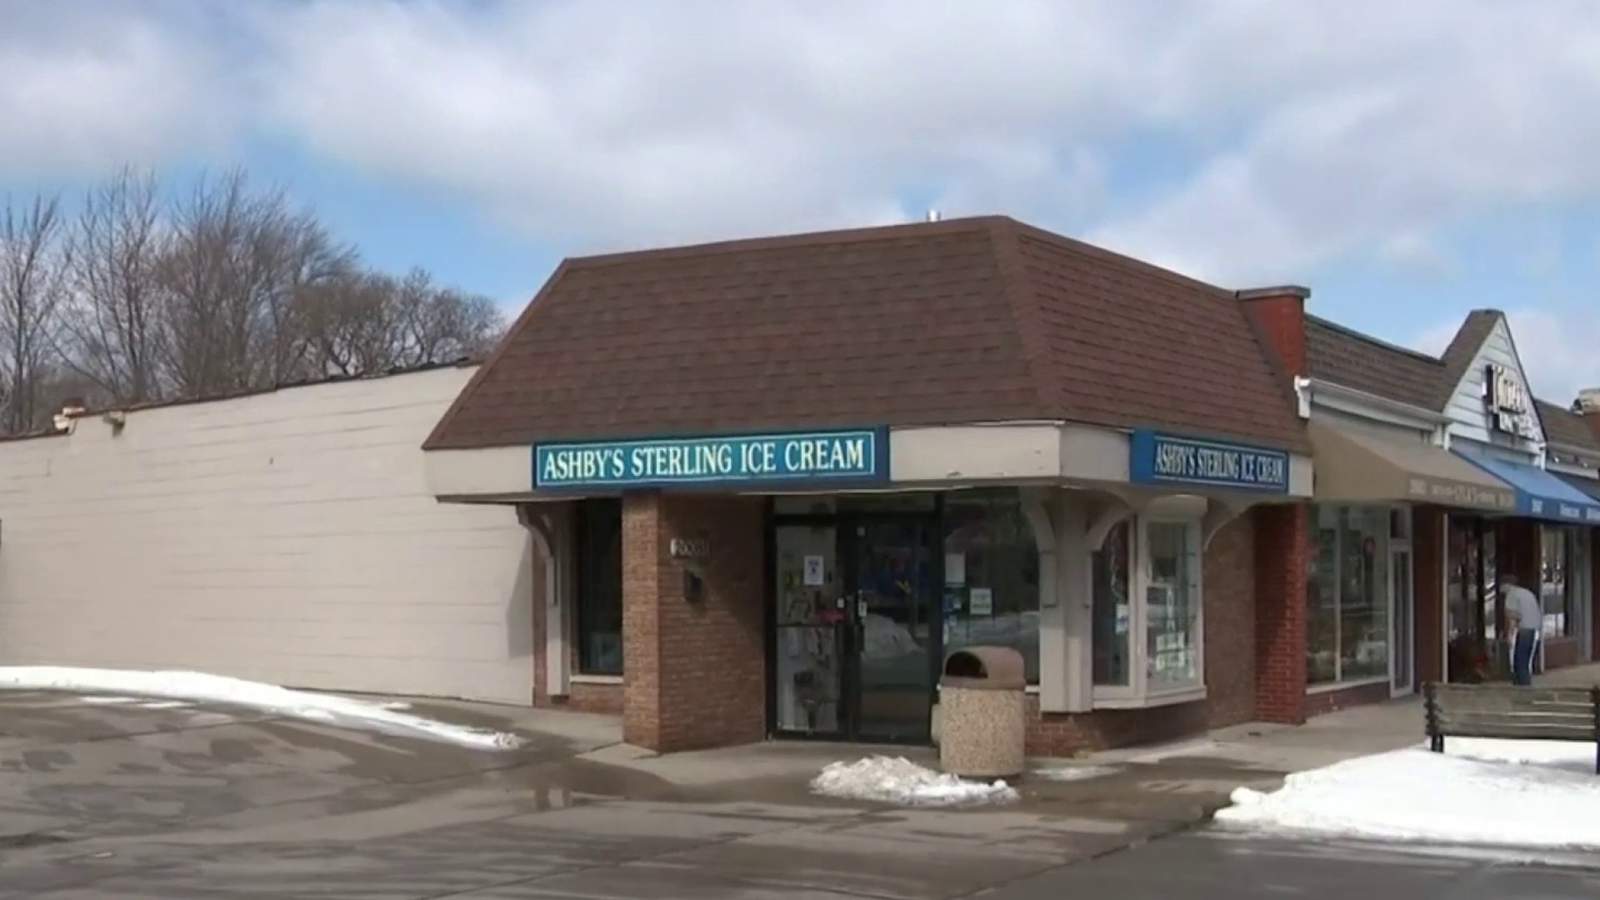 Community rallies around Ashby’s Sterling Ice Cream in Grosse Pointe Woods